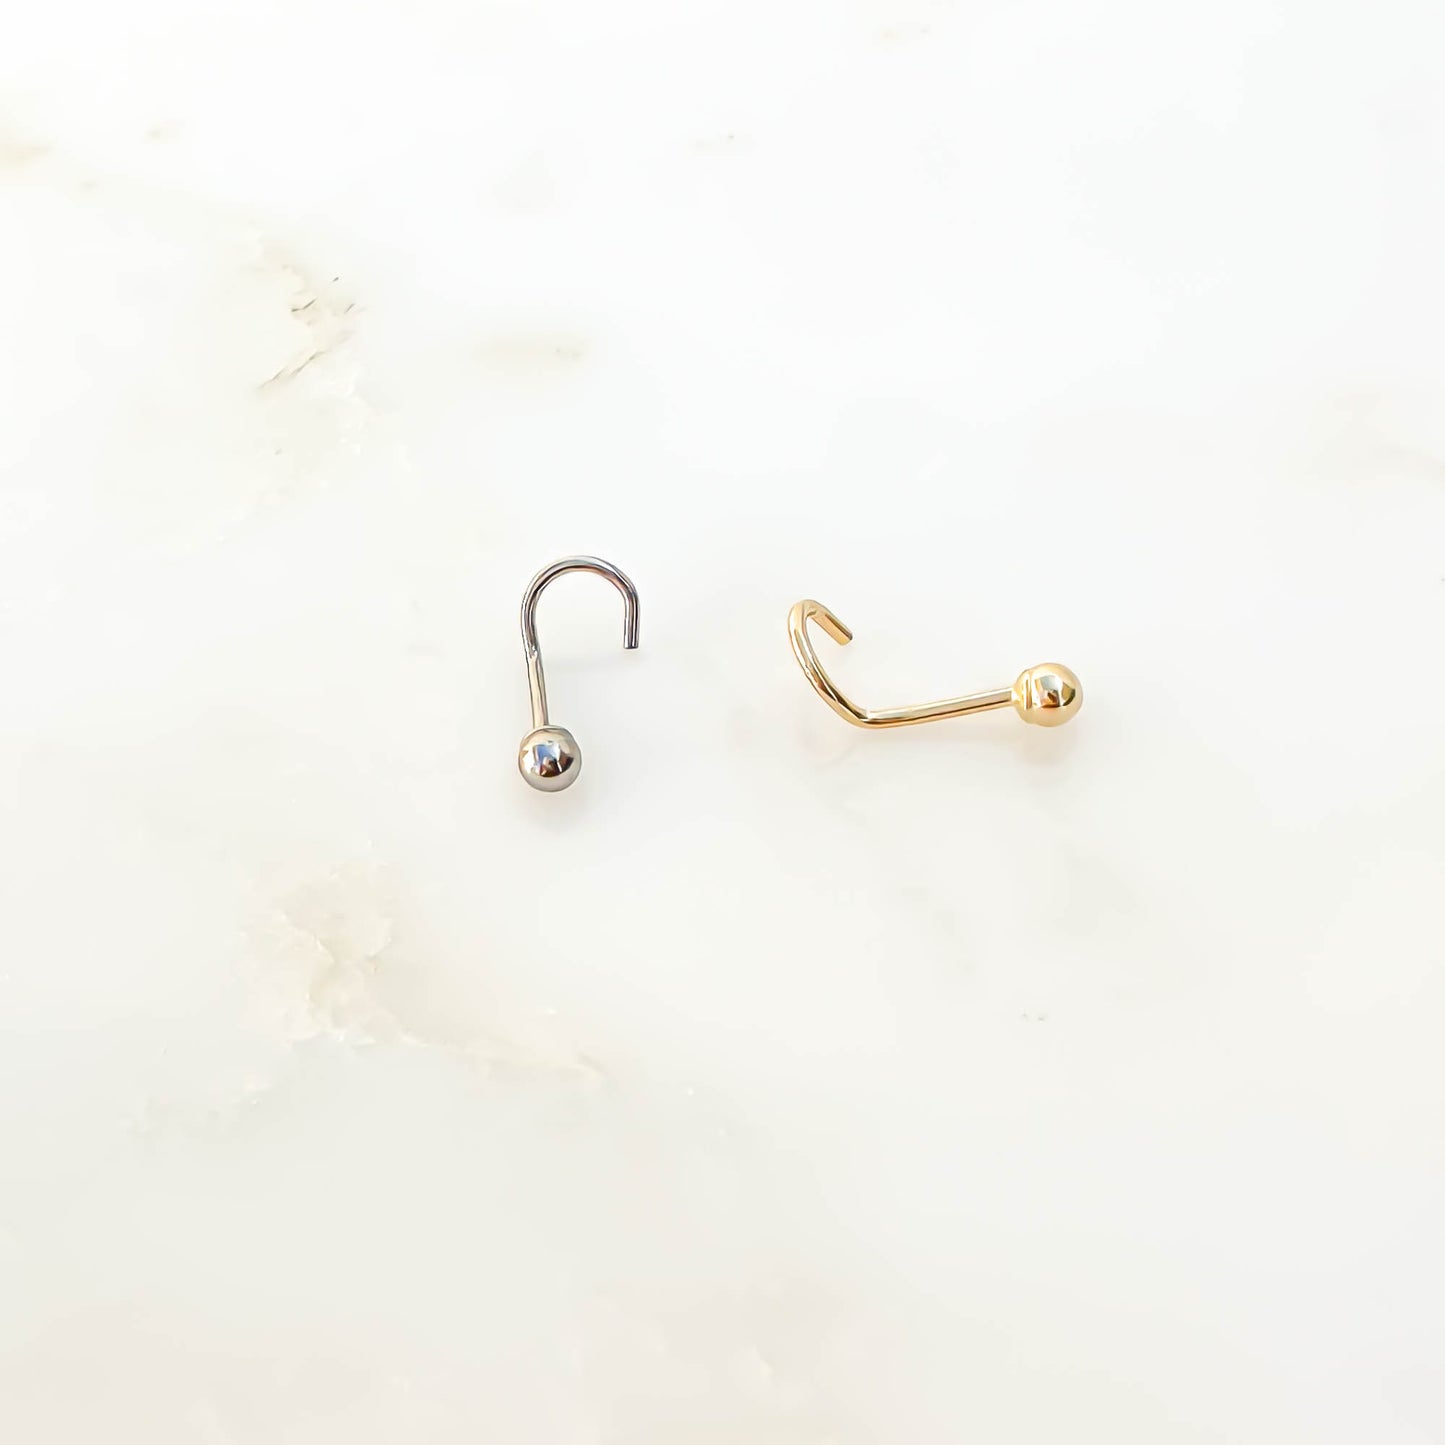 14K 2mm Ball Nose Screw Stud, White and Yellow Gold